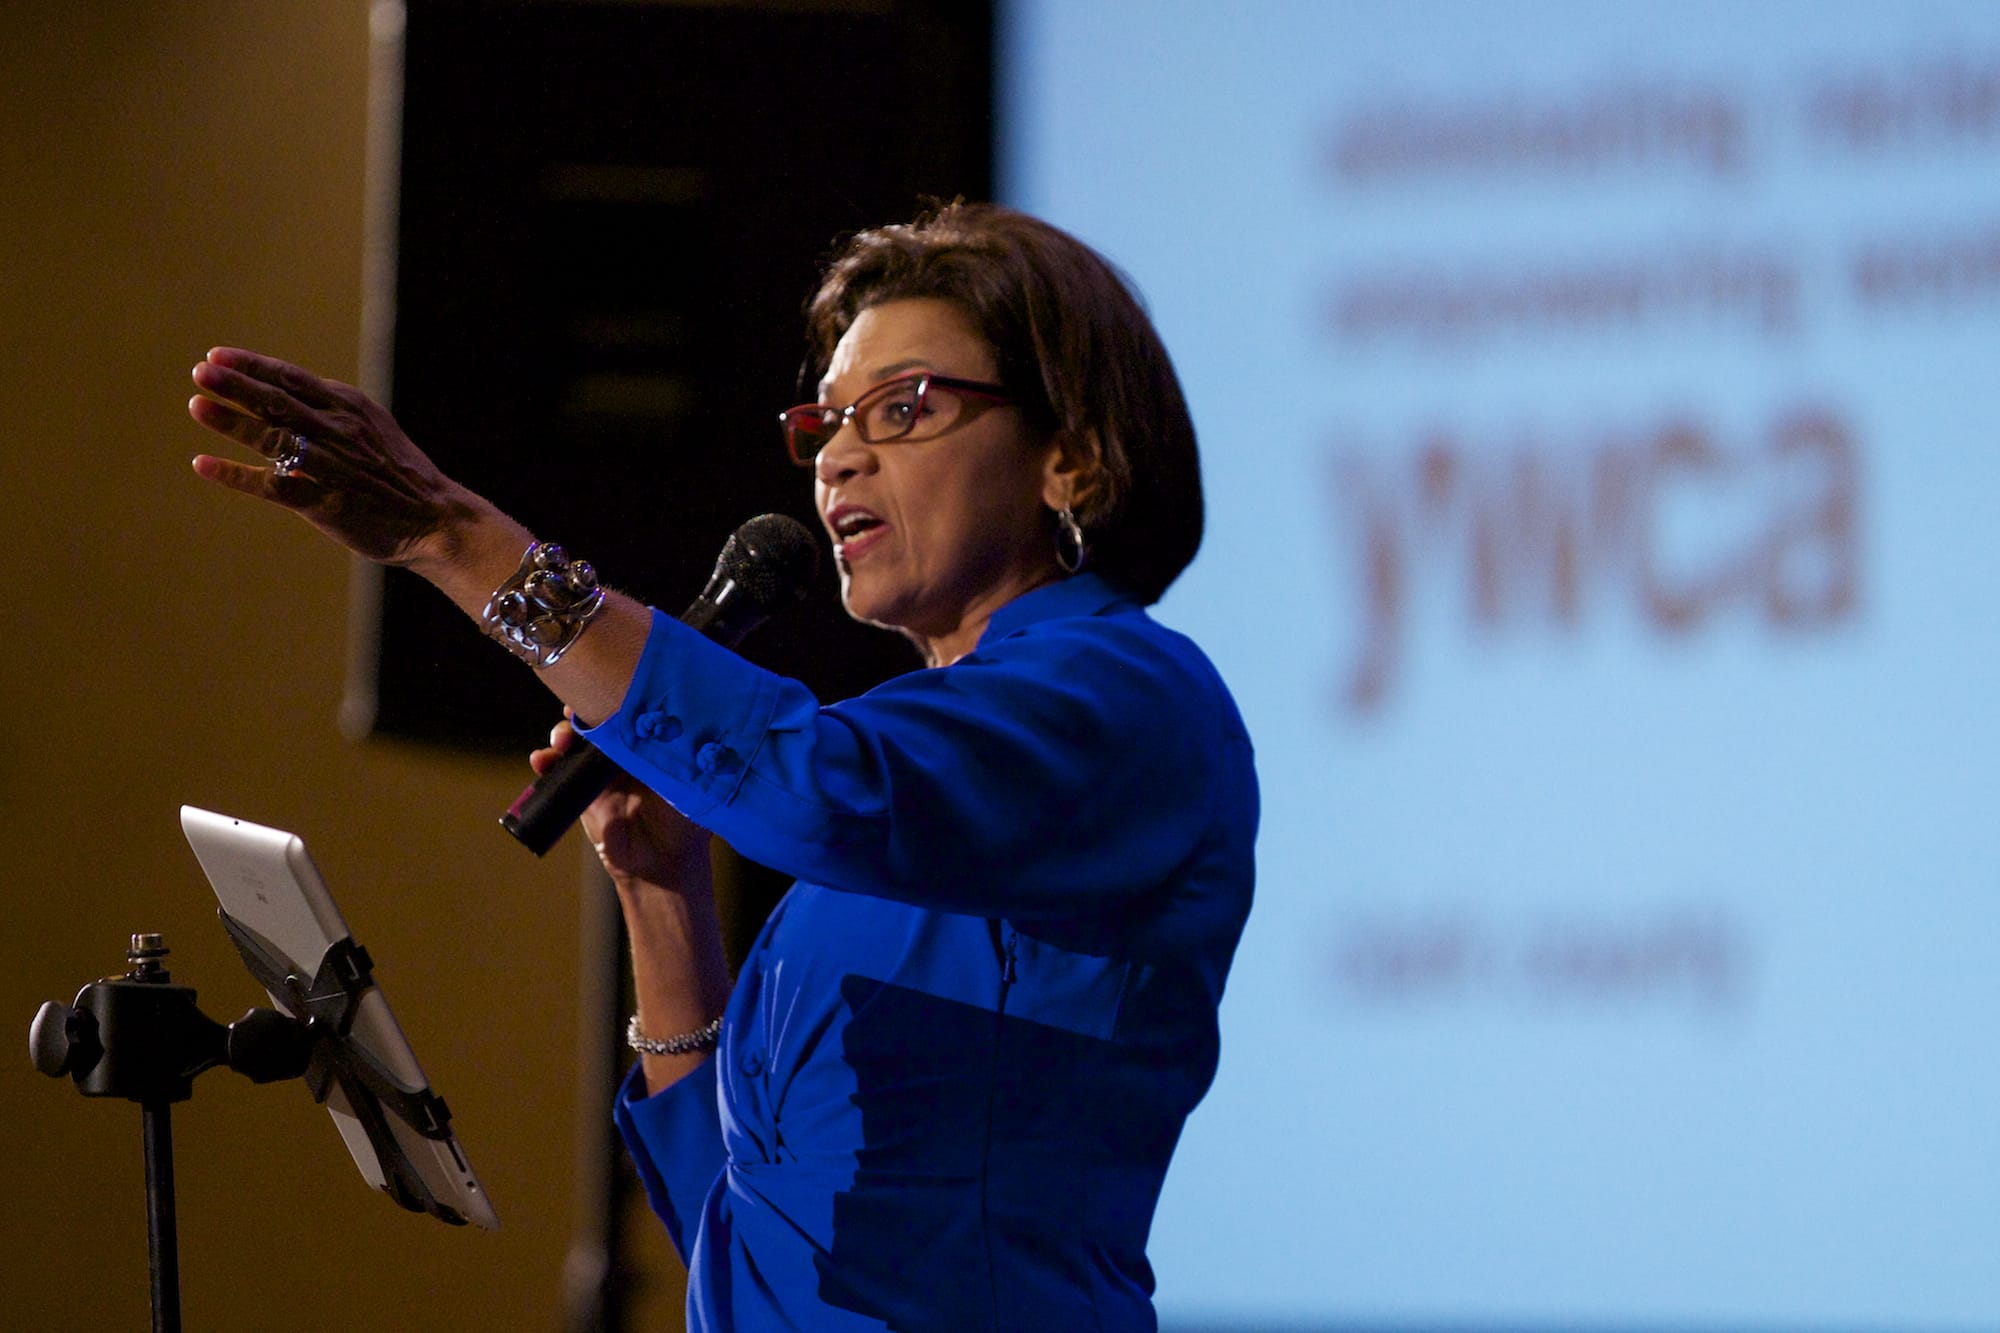 Sonia Manzano, who has acted and written for the public television show &quot;Sesame Street&quot; for decades, was the keynote speaker at the YWCA's annual fundraising luncheon at the Hilton Vancouver Washington on Wednesday.